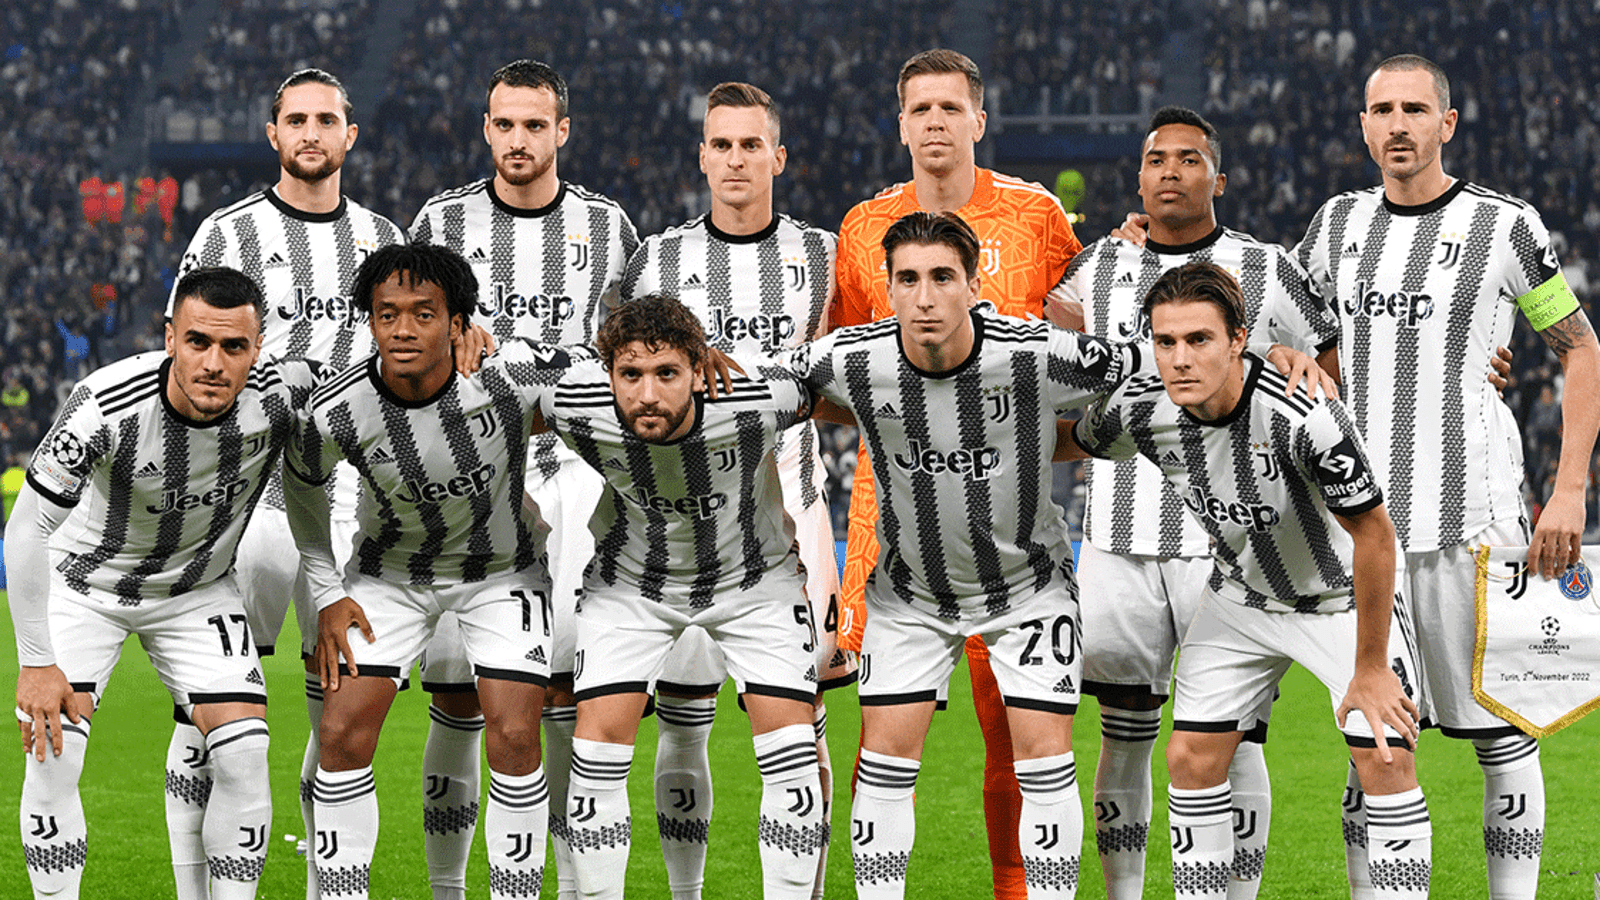 As Juventus head for a second Champions League final in three